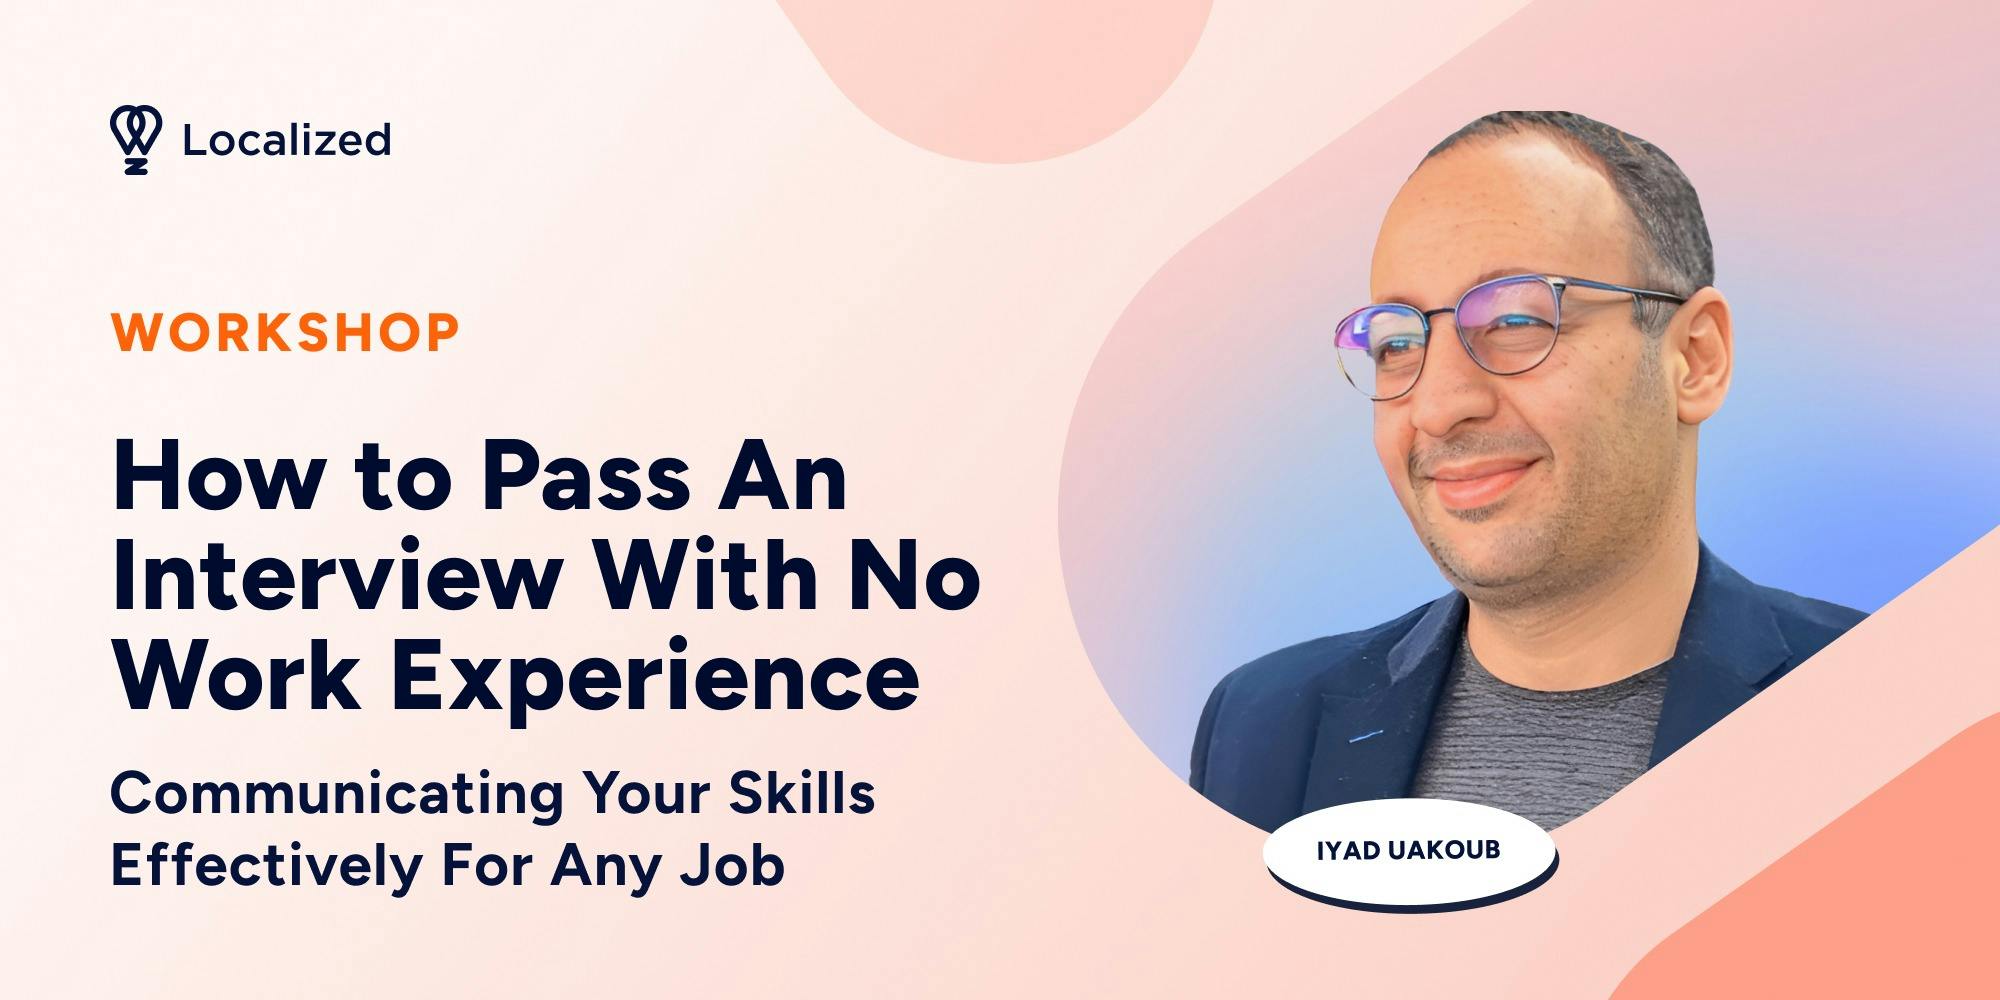 Workshop: How to Pass An Interview With No Work Experience - Communicating Your Skills Effectively For Any Job